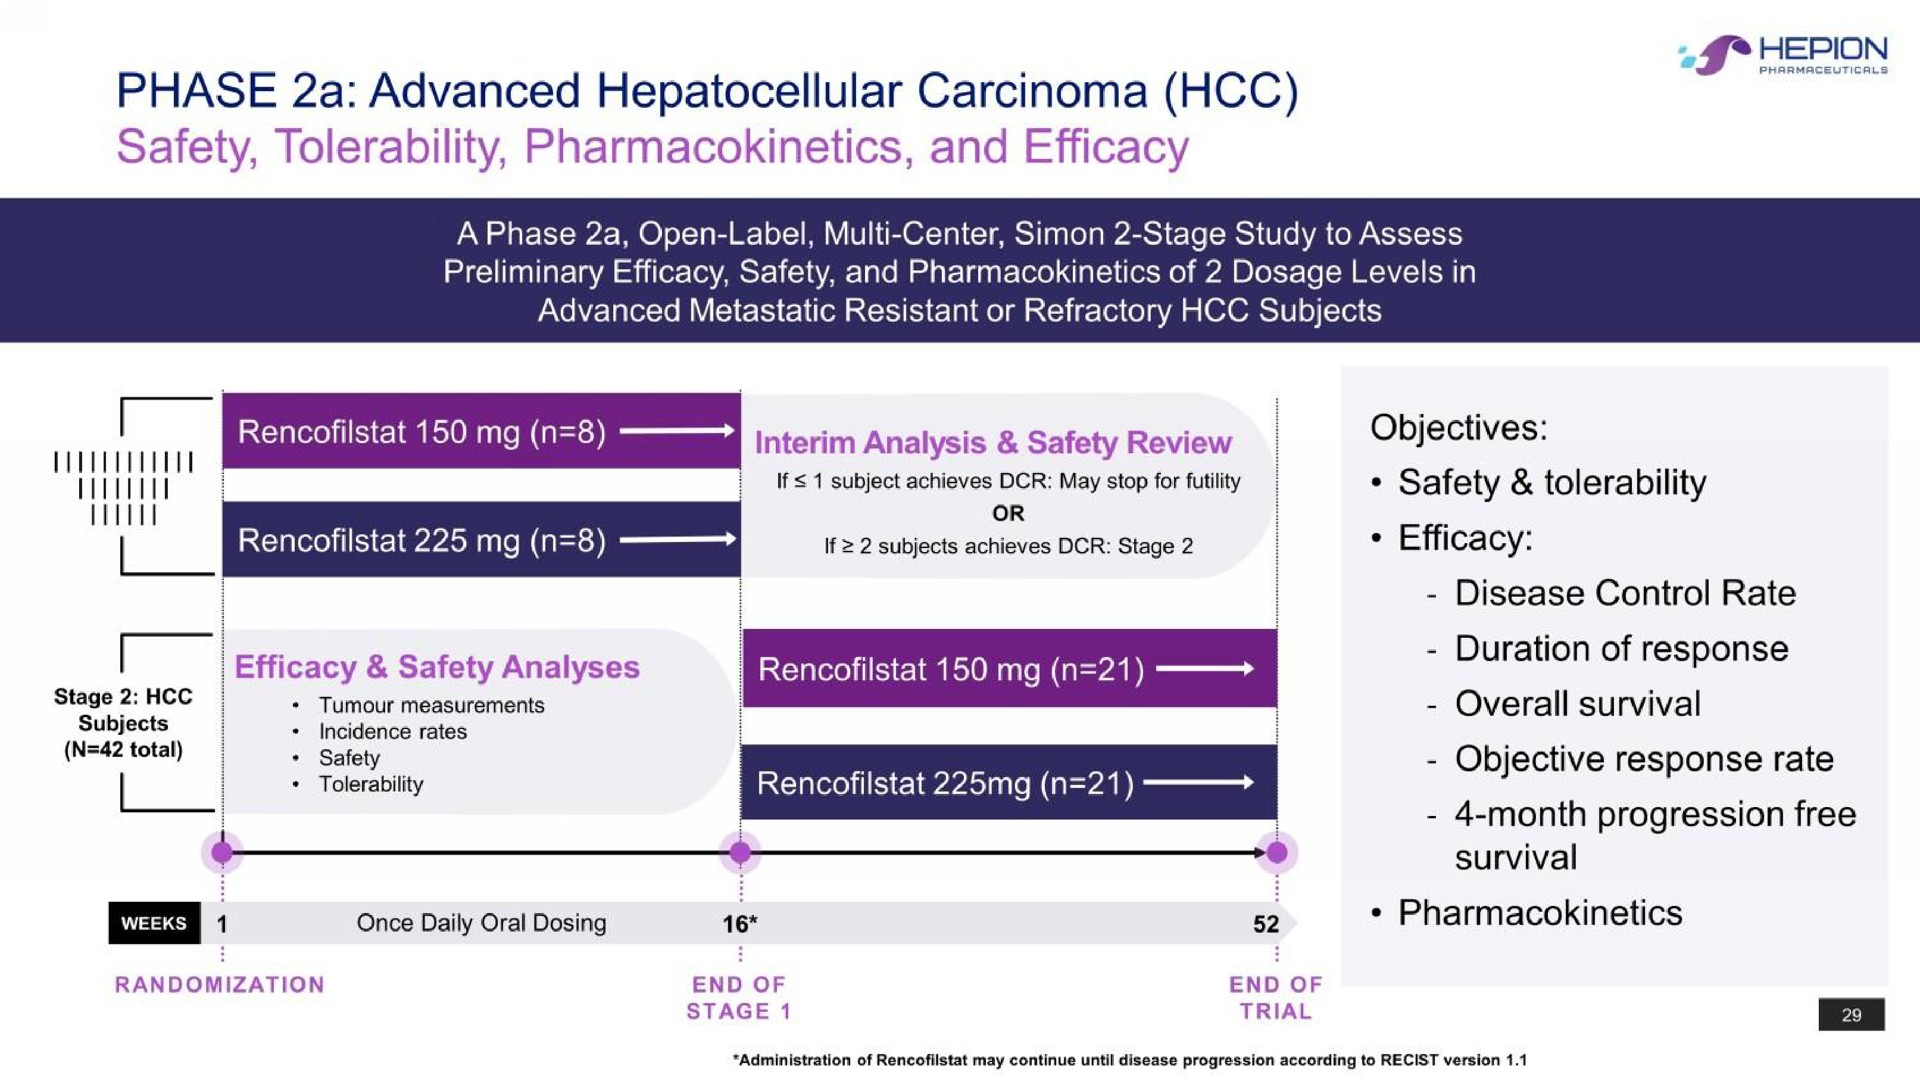 phase a advanced carcinoma safety tolerability and efficacy nee a | Hepion Pharmaceuticals